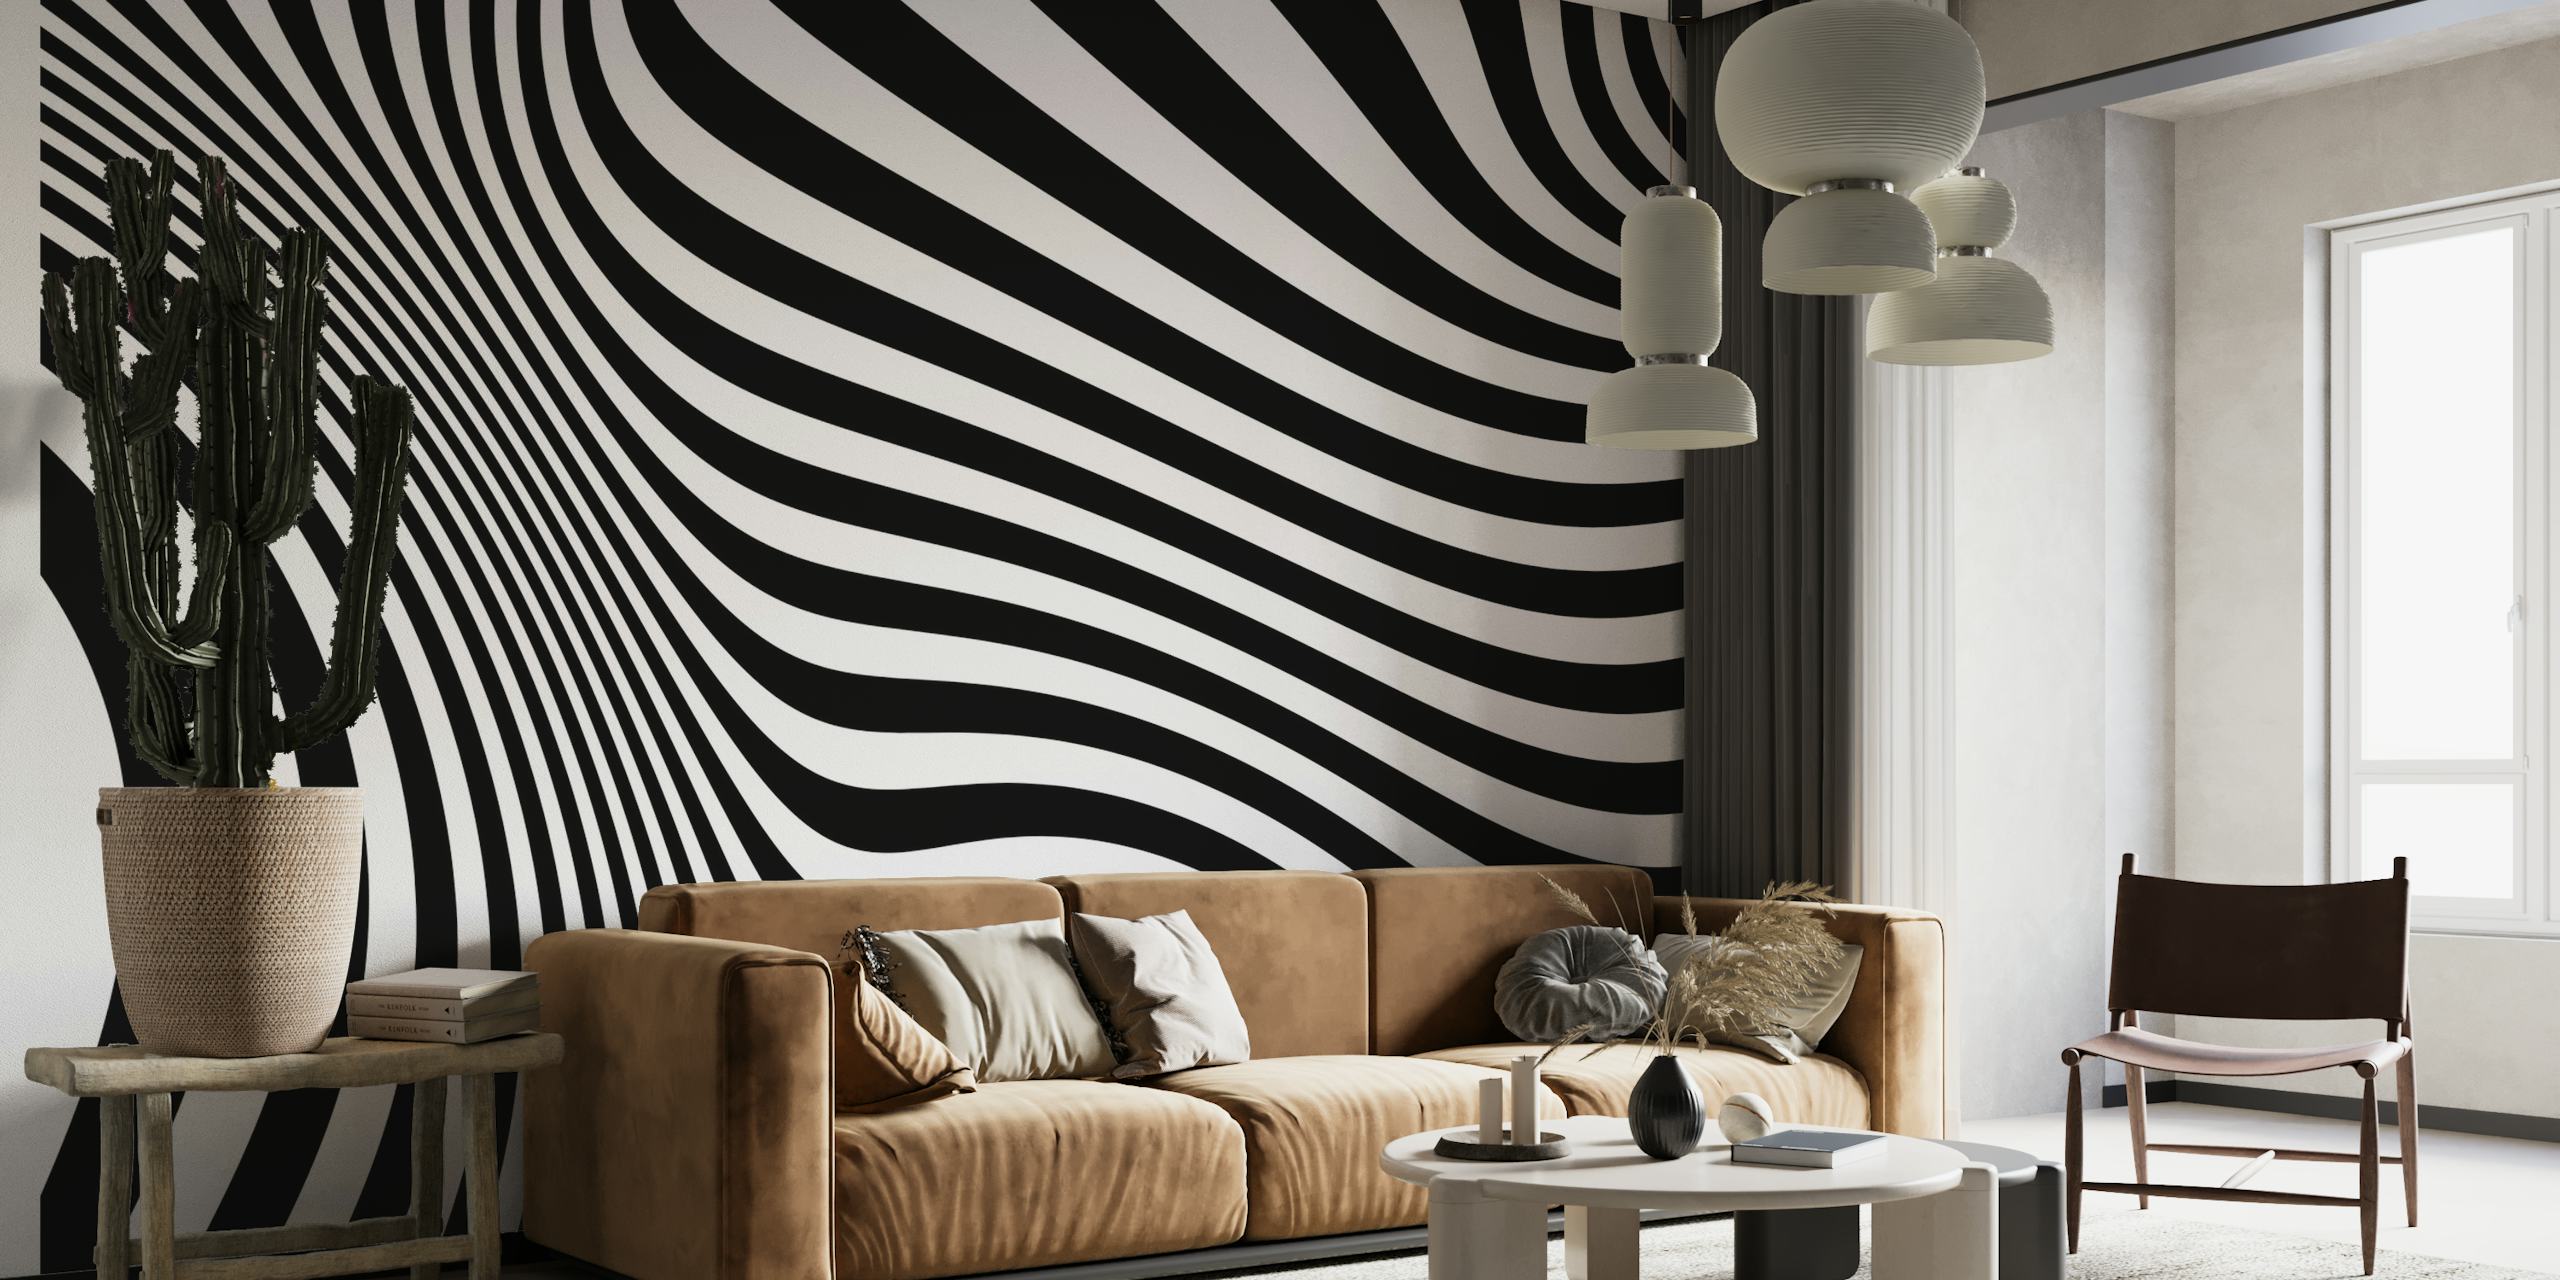 Op Art Retro Black and White wall mural with hypnotic swirling lines